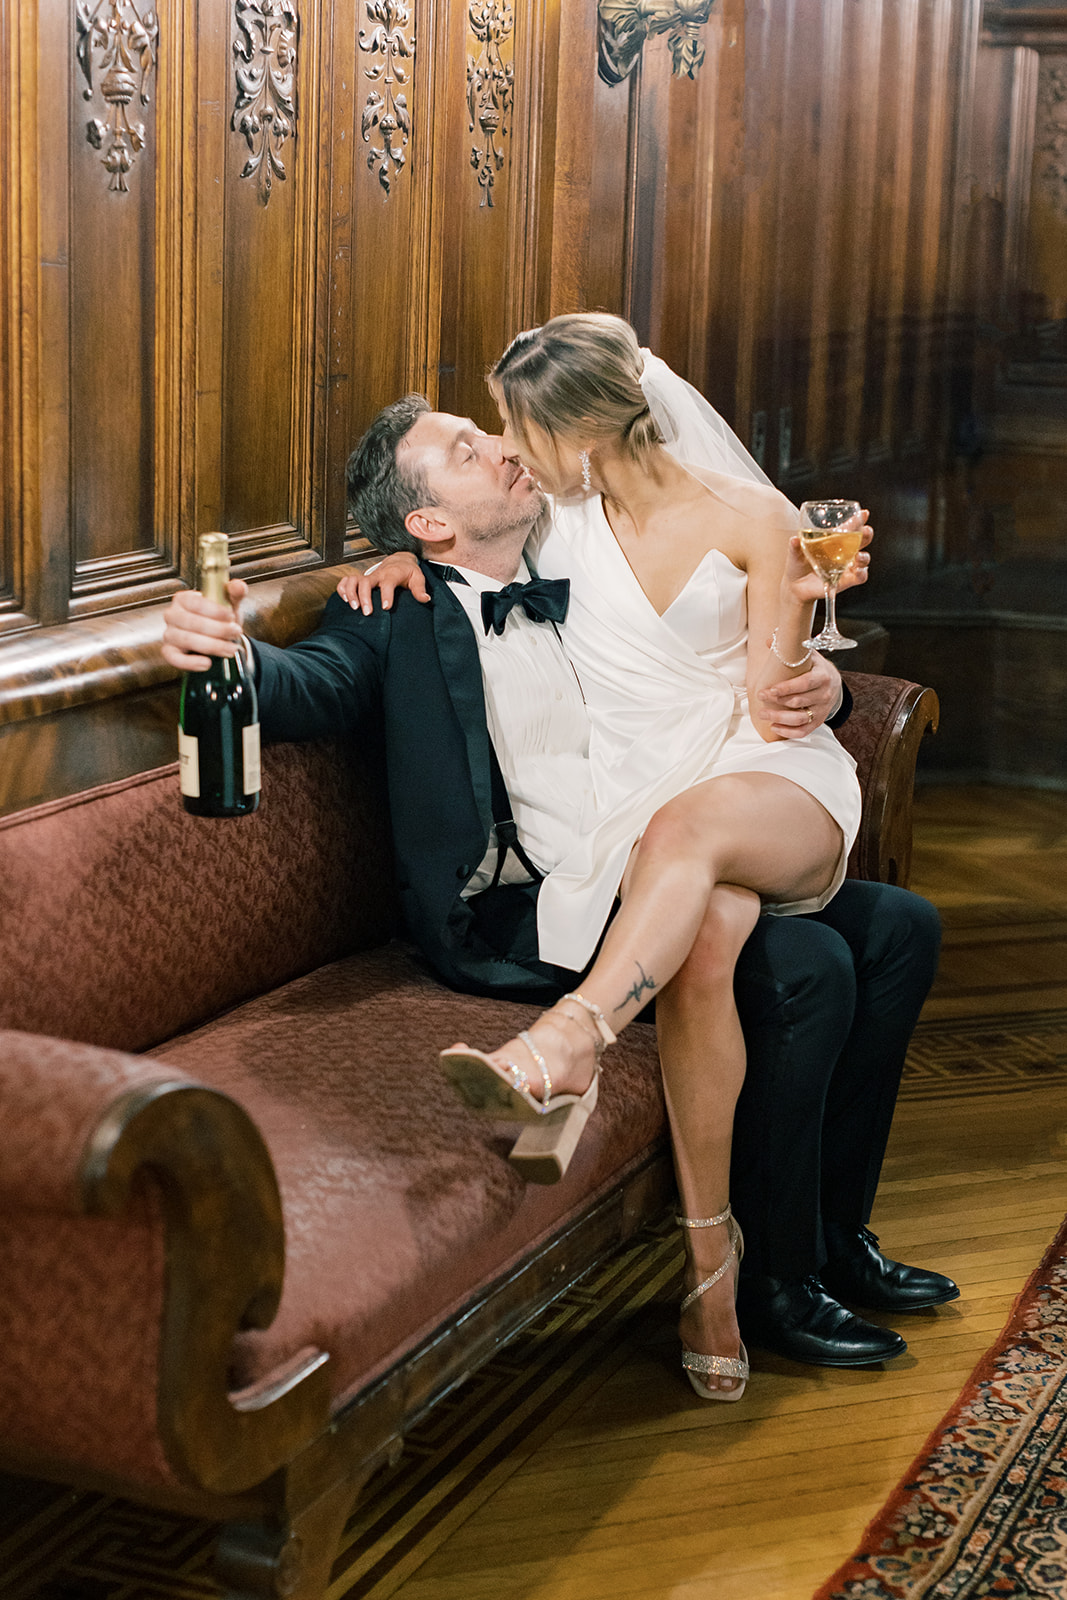 Bride and groom kiss with champagne glasses in hand. 